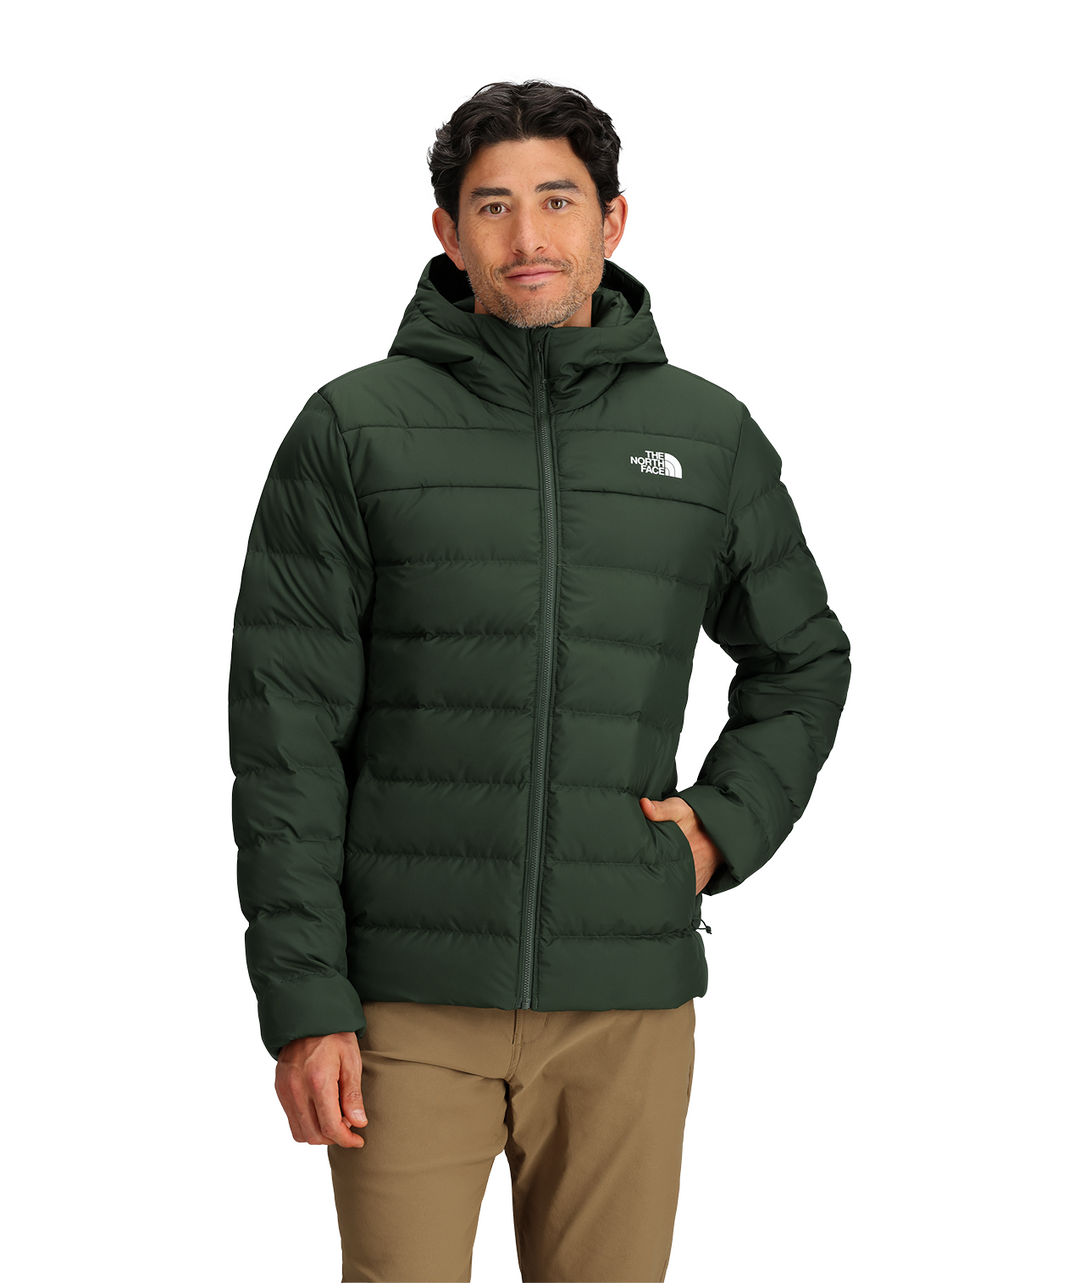 The North Face Aconcagua 3 Jacket for Men in Black